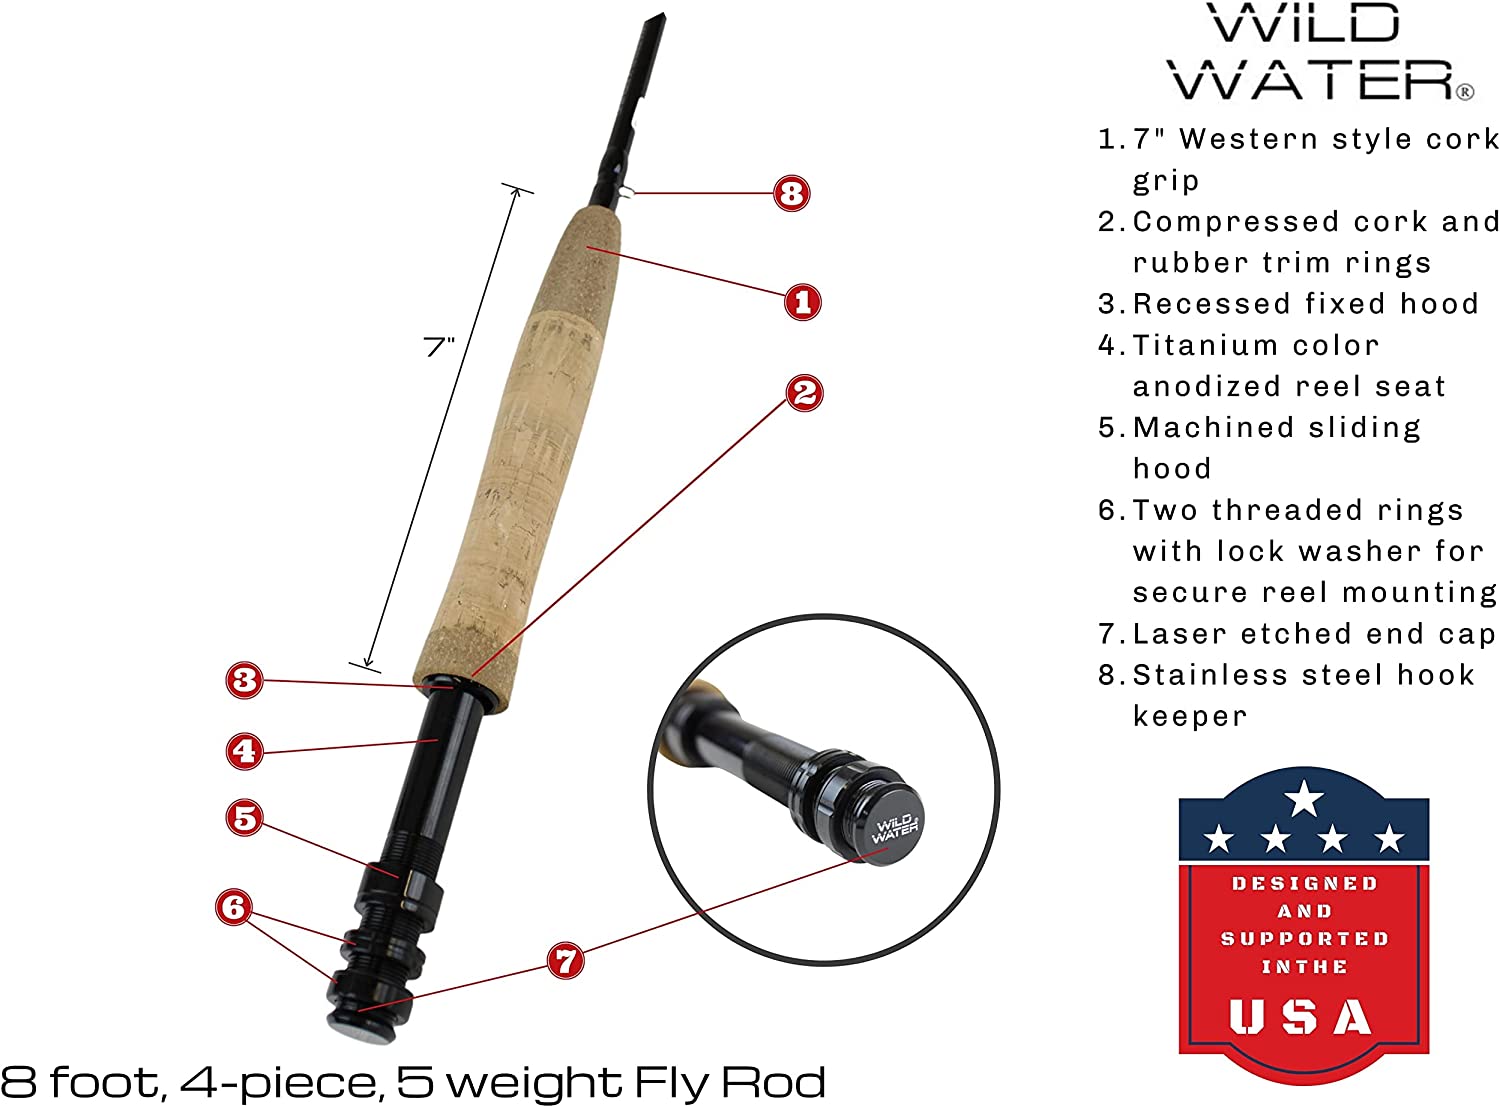 Wild Water Standard Fly Fishing Combo, 5 wt 8 ft 4 piece Rod - Angler's Pro Tackle & Outdoors